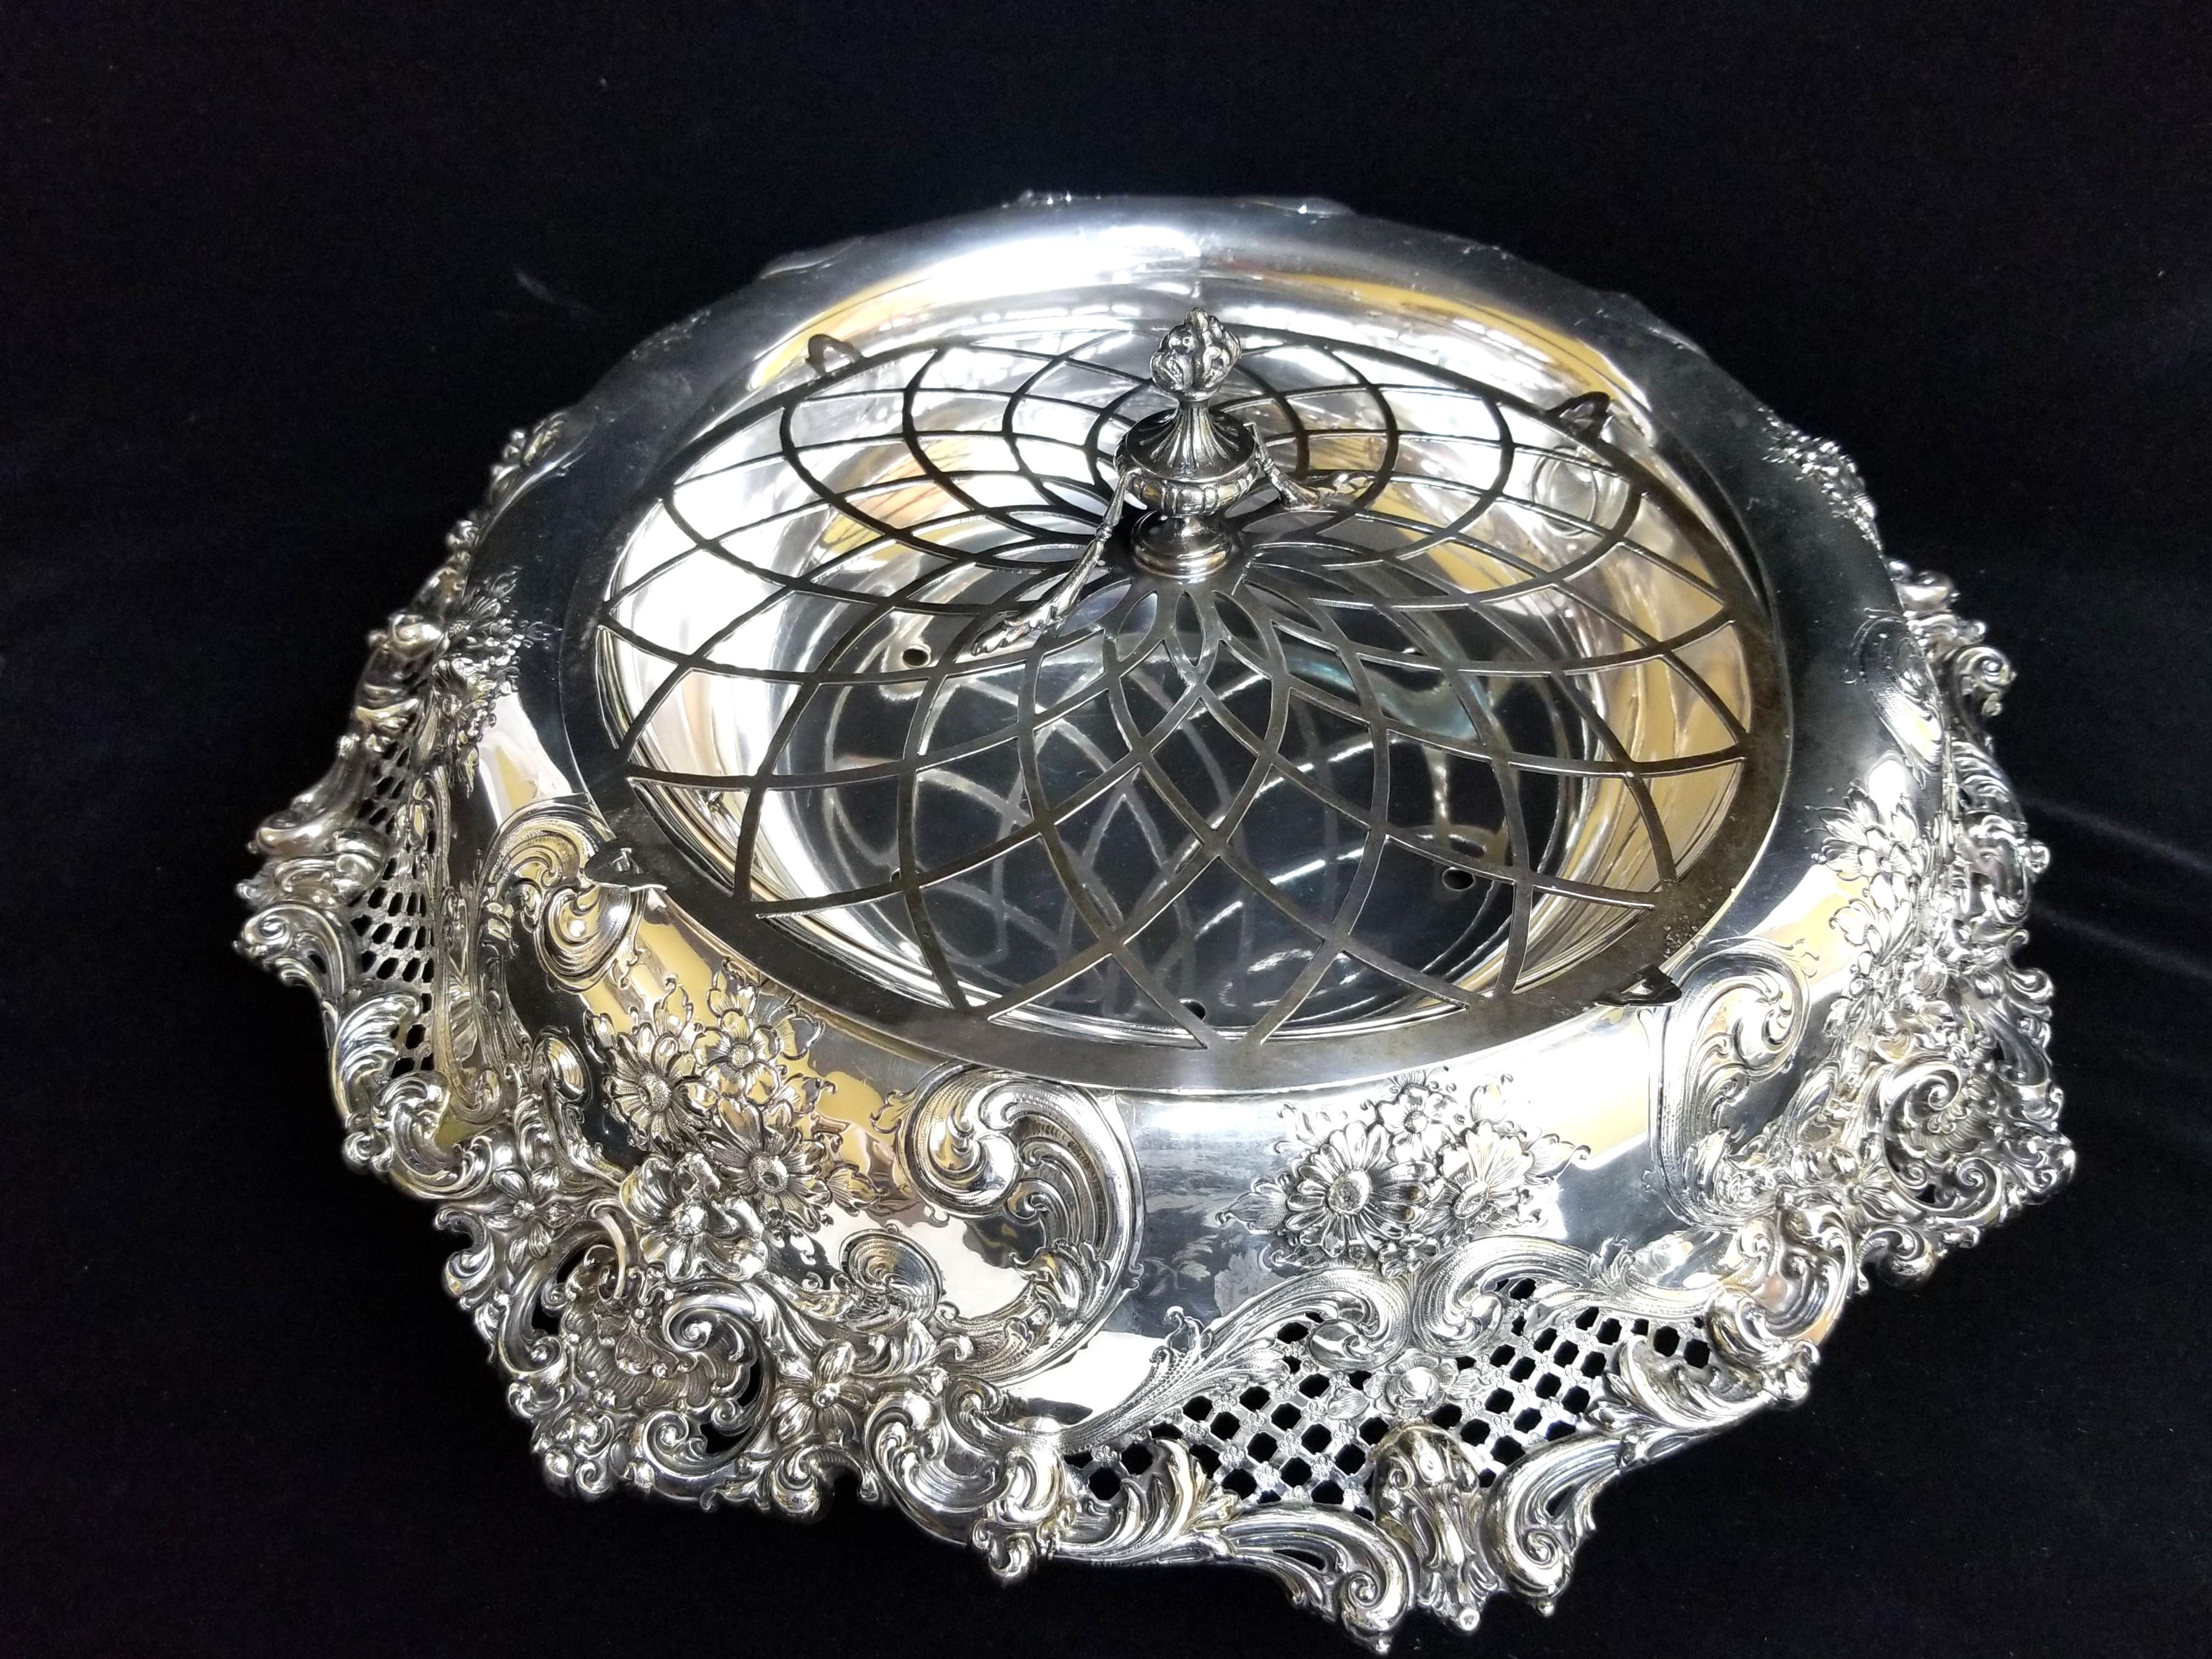 Outstanding antique Redlich & Co. sterling silver and silver plate centerpiece. The main body of the centerpiece on a pedestal has intricate art nouveau style floral engravings and piercings at each side. It has a removable silver-plated bowl and